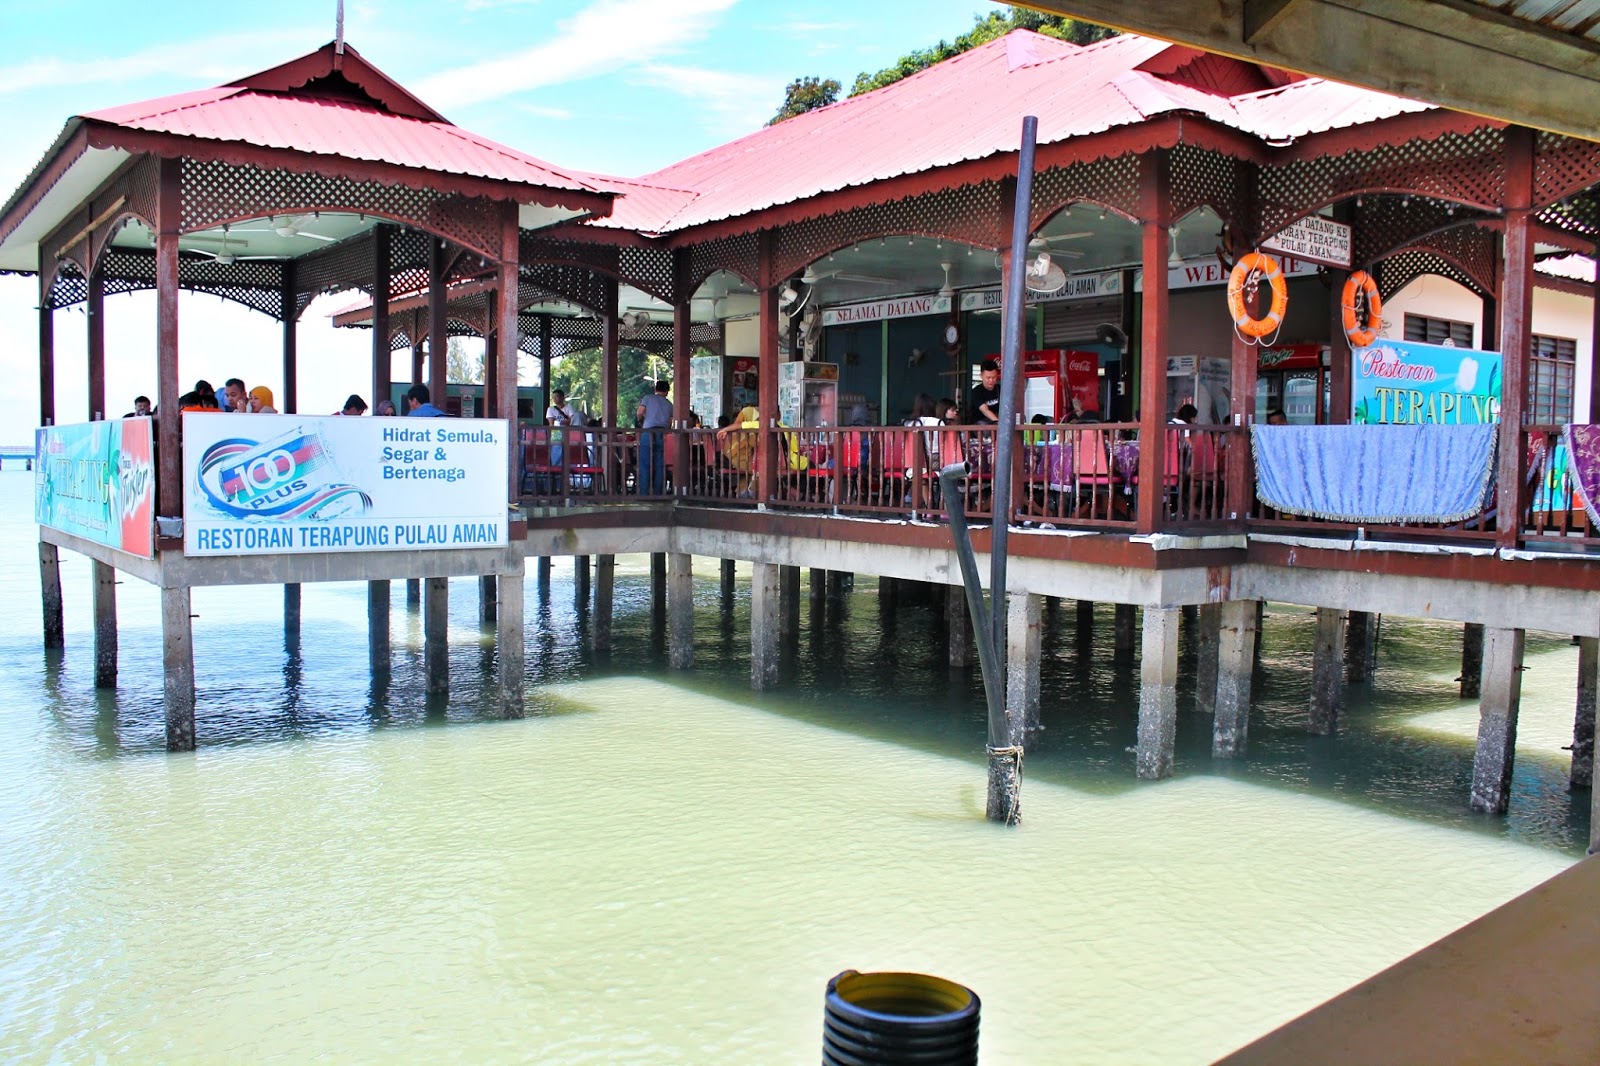 Discovering Hidden Charm of Pulau Aman: Things you must do in Pulau Aman